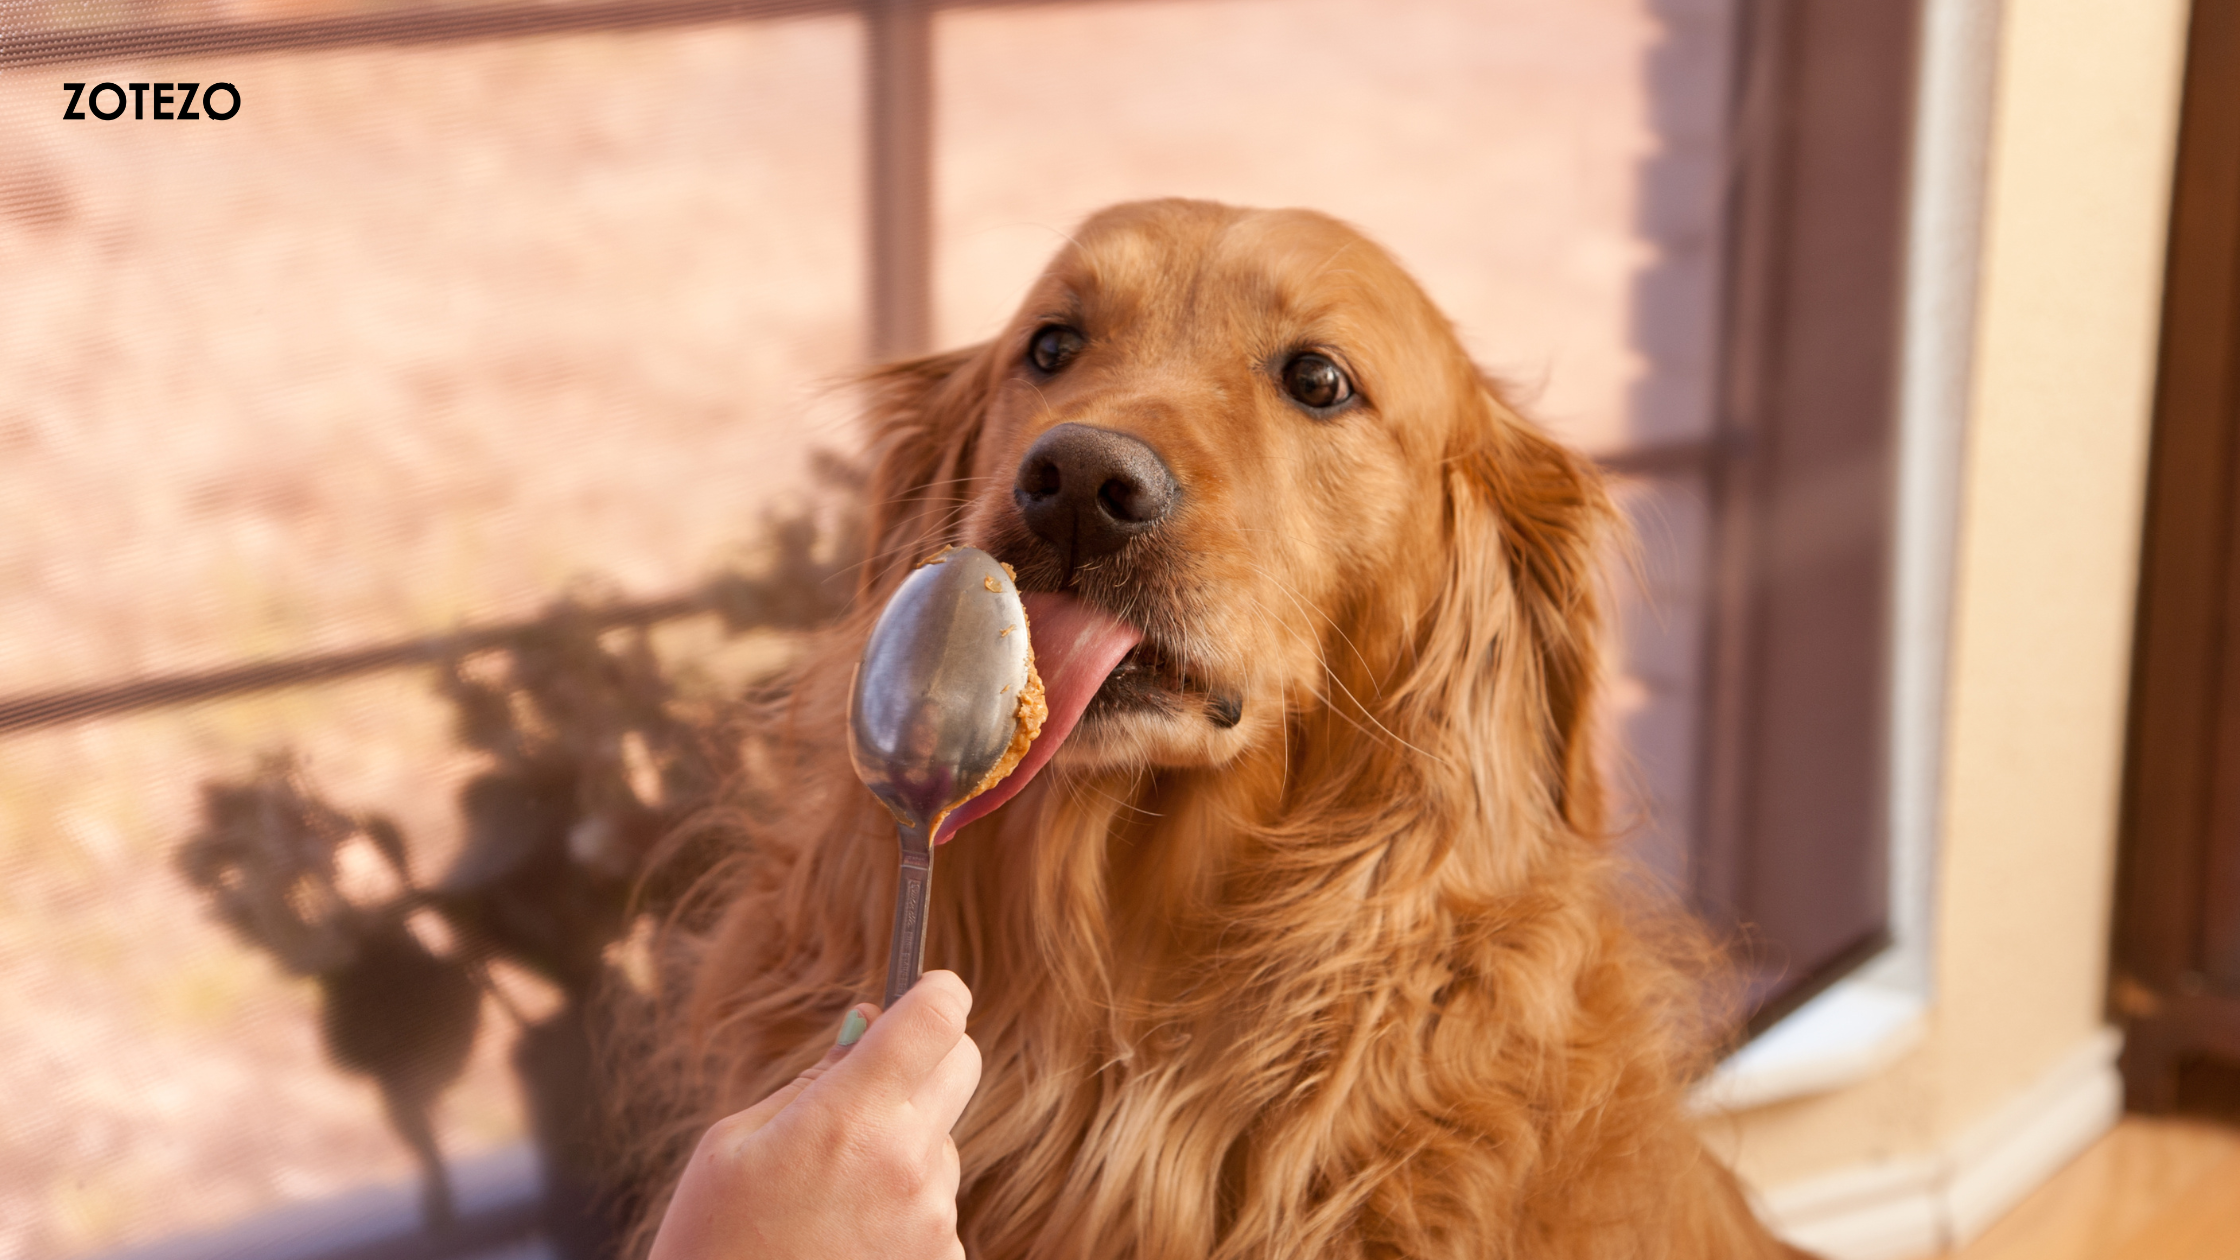 Peanut Butter For Dogs in the World